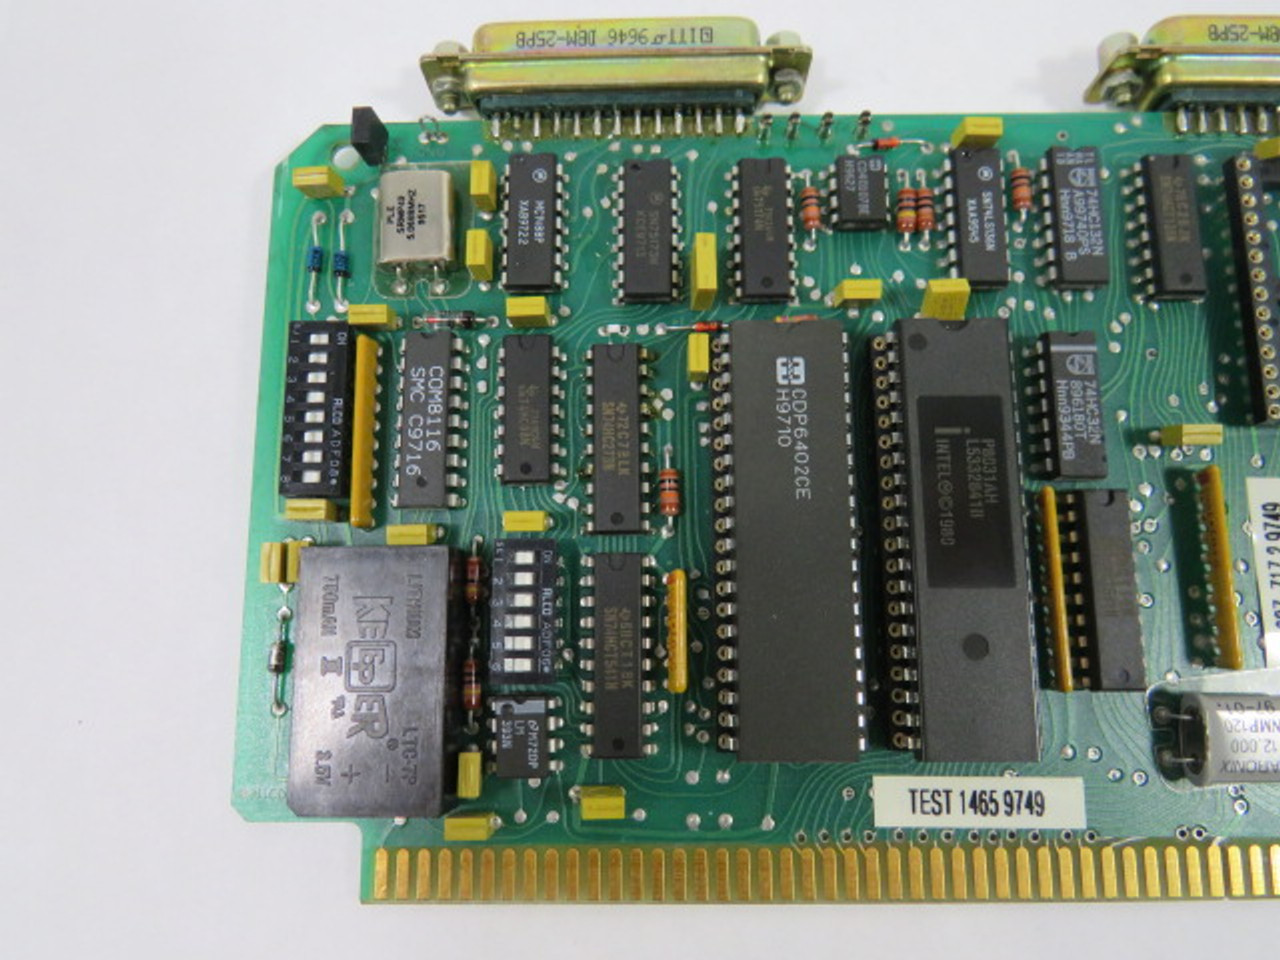 Unico 400-048-A 307-717.2 Circuit Board *Missing 2 Memory Chips* USED